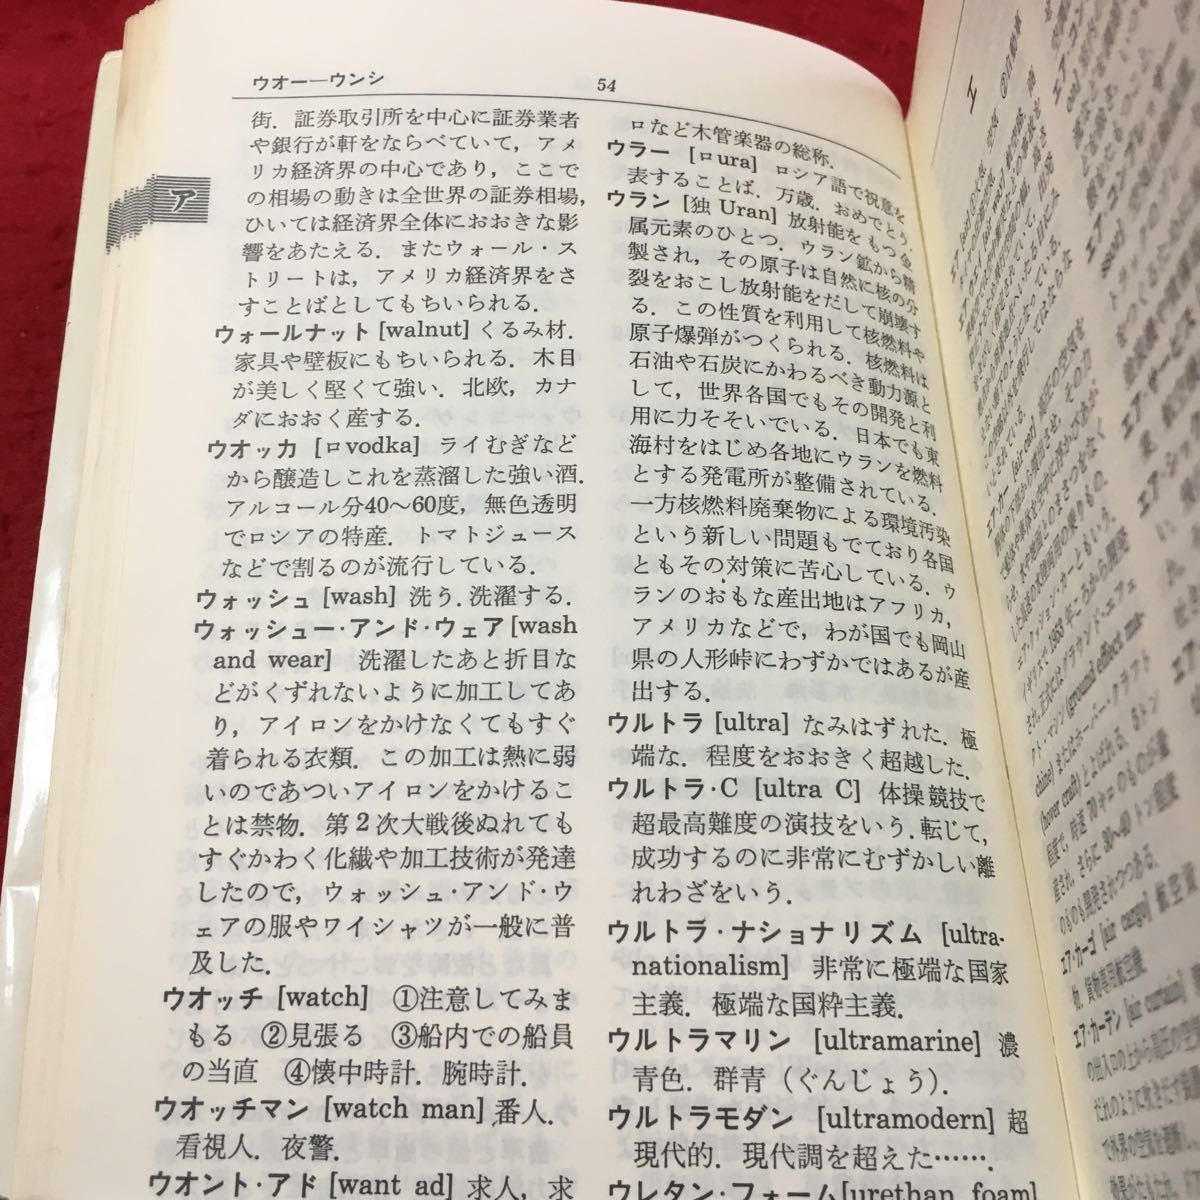 g-361 daily use borrowed word new dictionary Showa era 54 year 4 month no. 2 version issue hill beautiful thousand male compilation chopsticks person corporation .. paper . issue place discoloration equipped *2